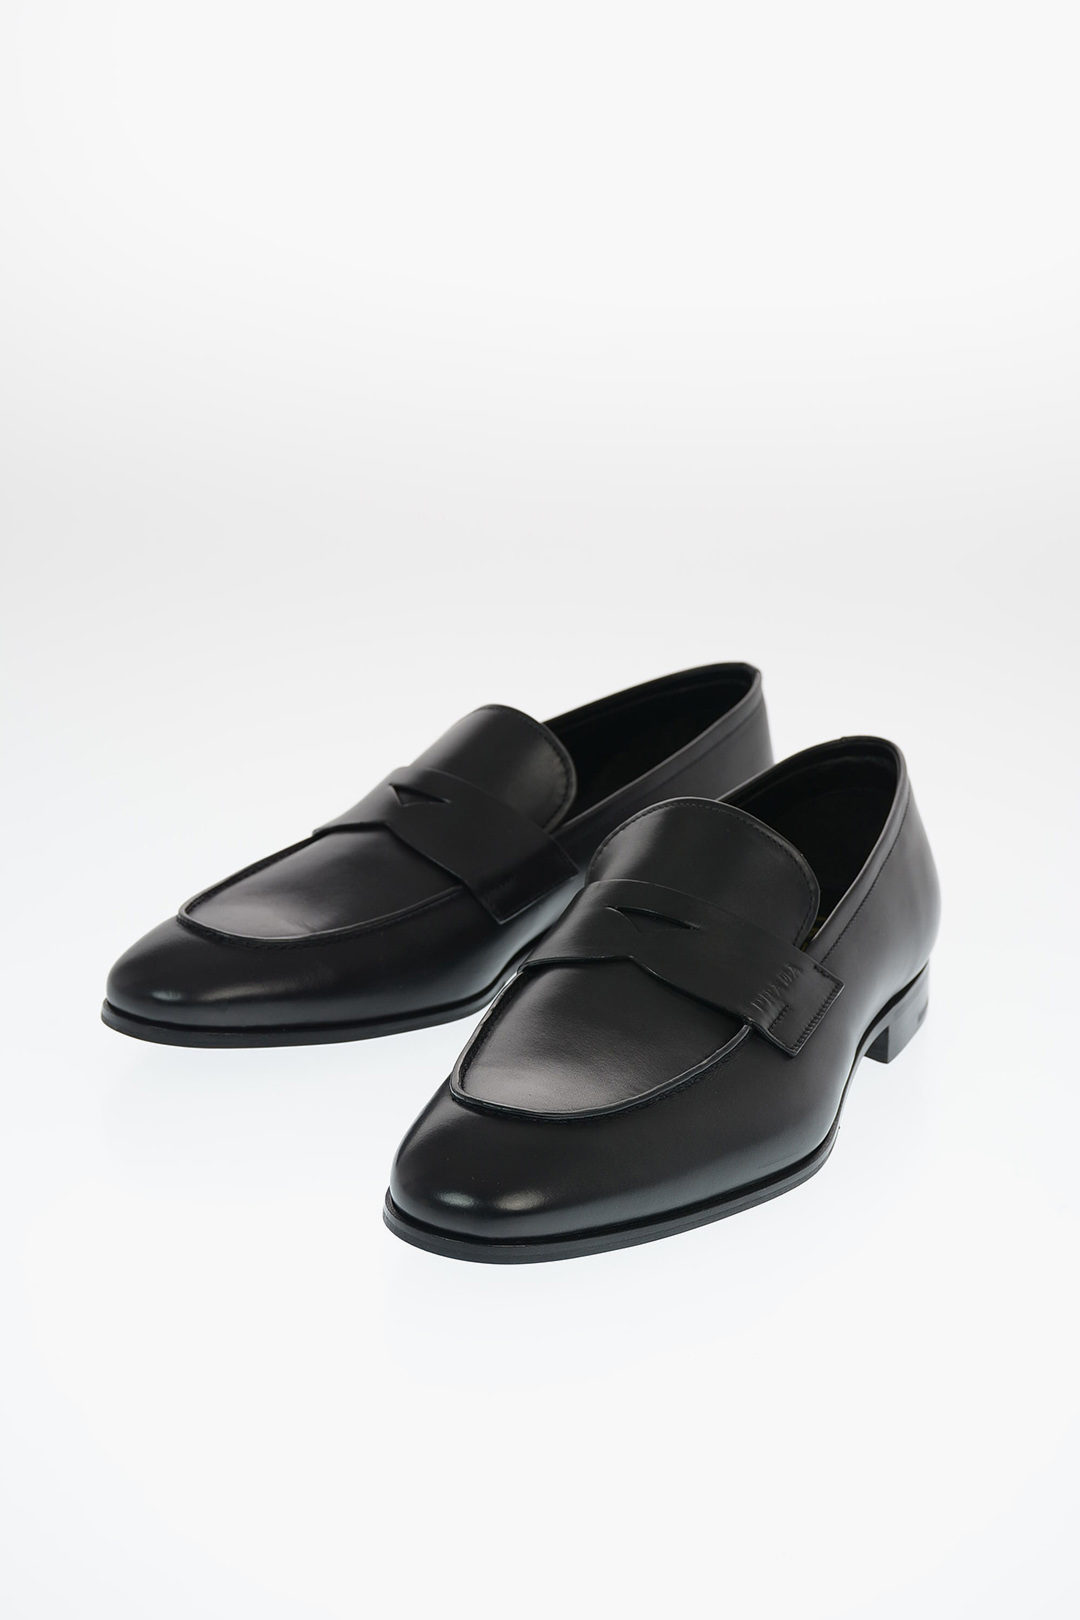 Prada Leather Penny Loafers men - Glamood Outlet